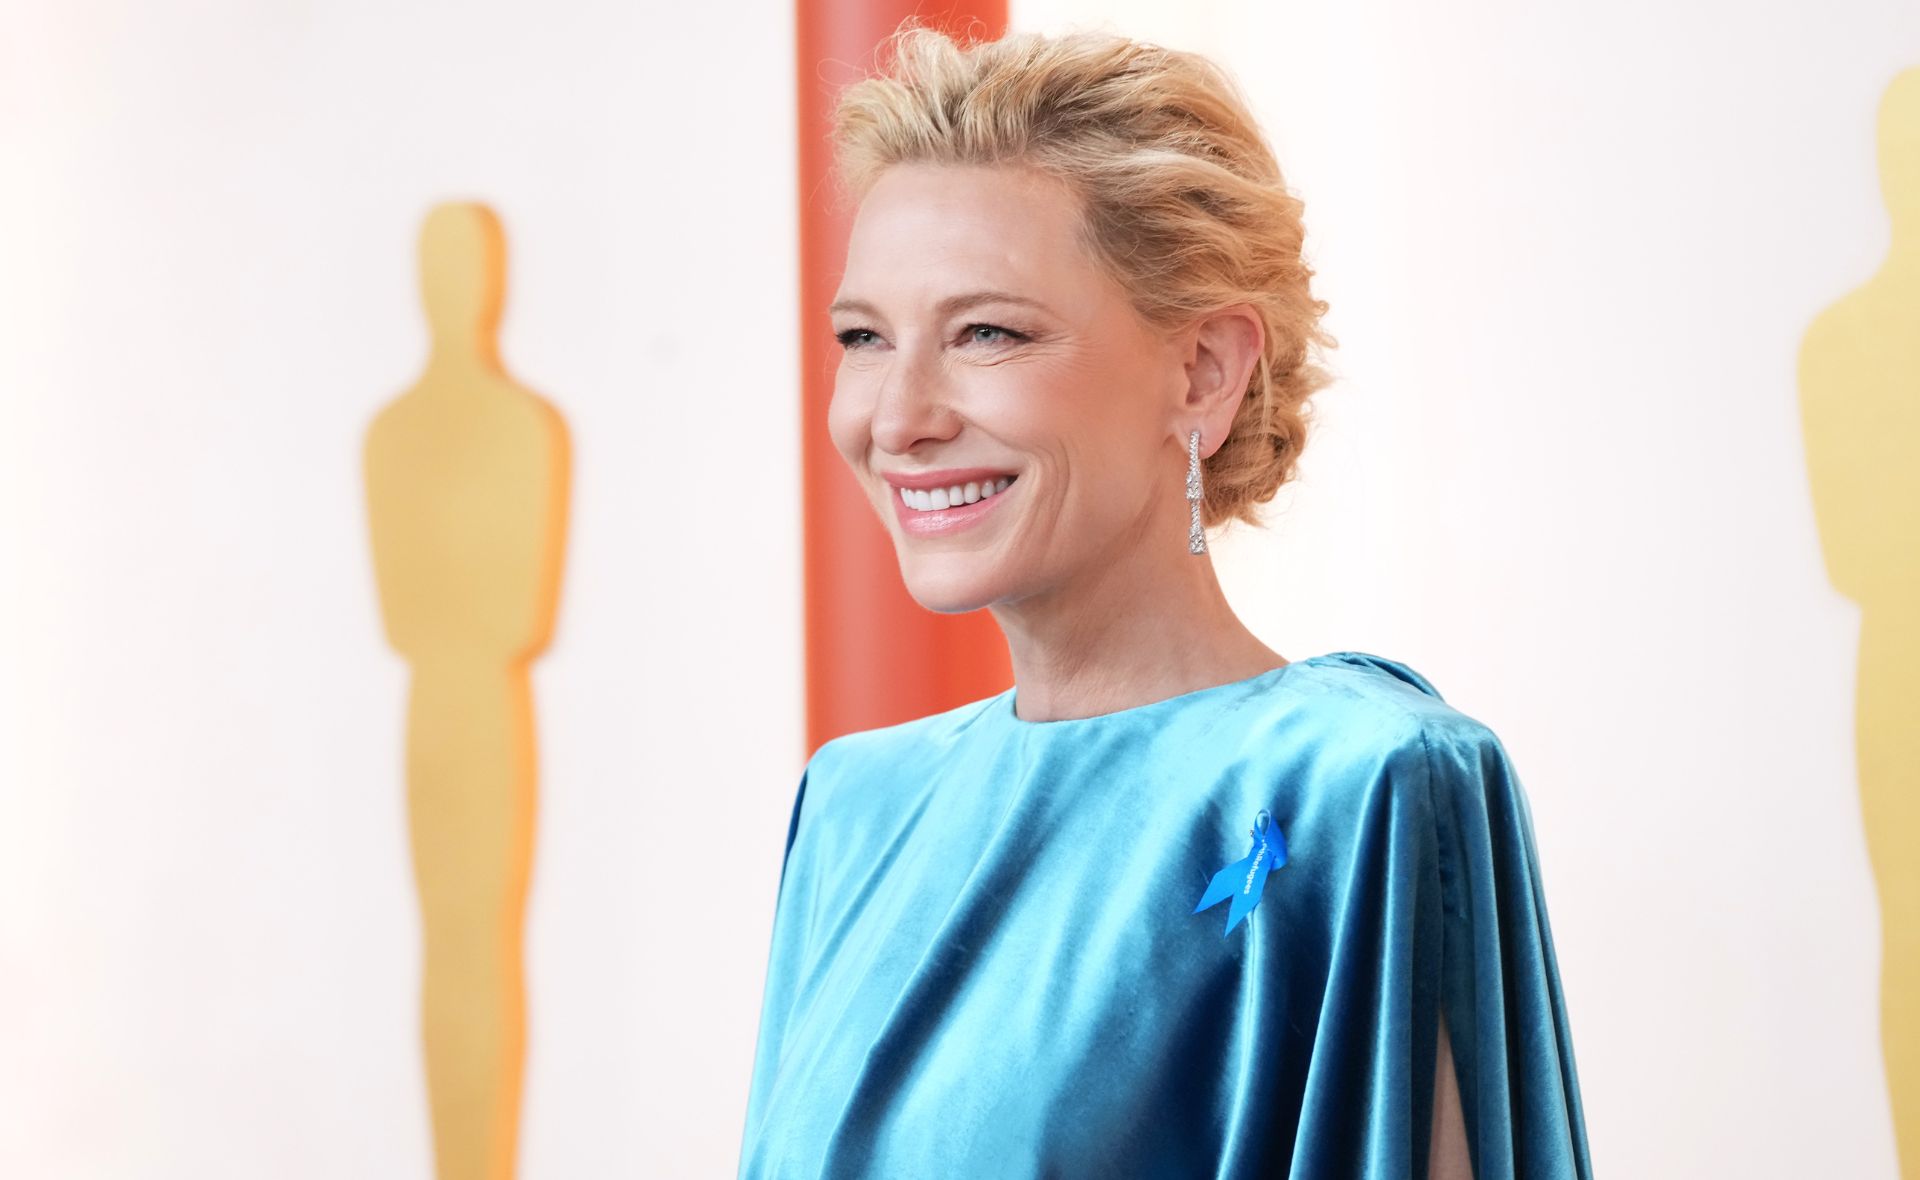 Get the Cate Blanchett glow with 9 of the most flawless dewy foundations for mature skin